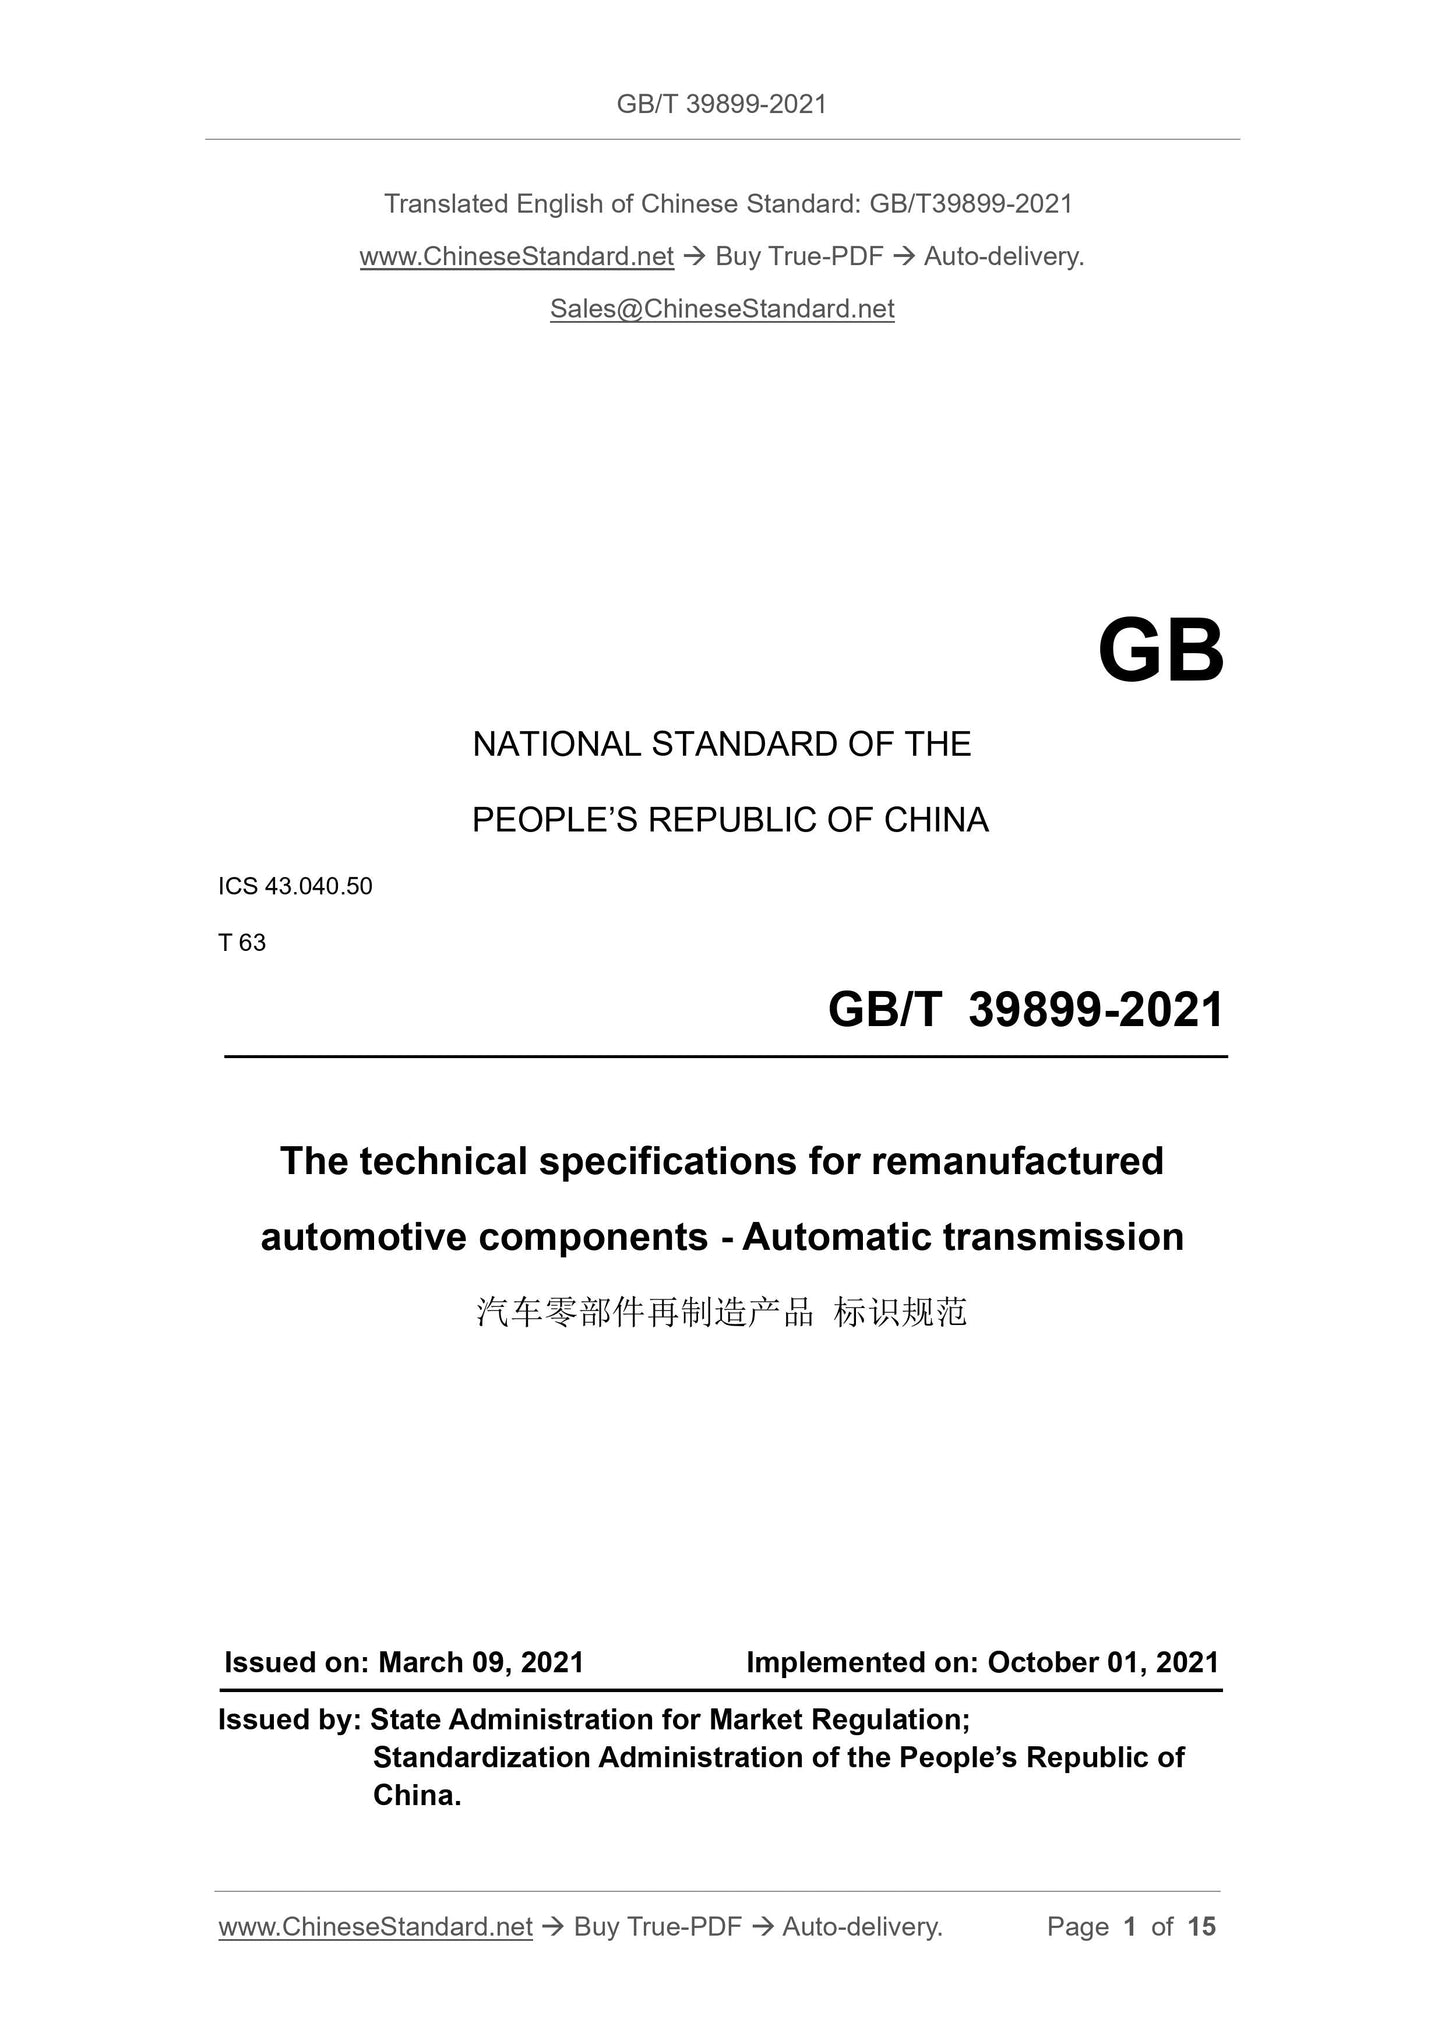 GB/T 39899-2021 Page 1